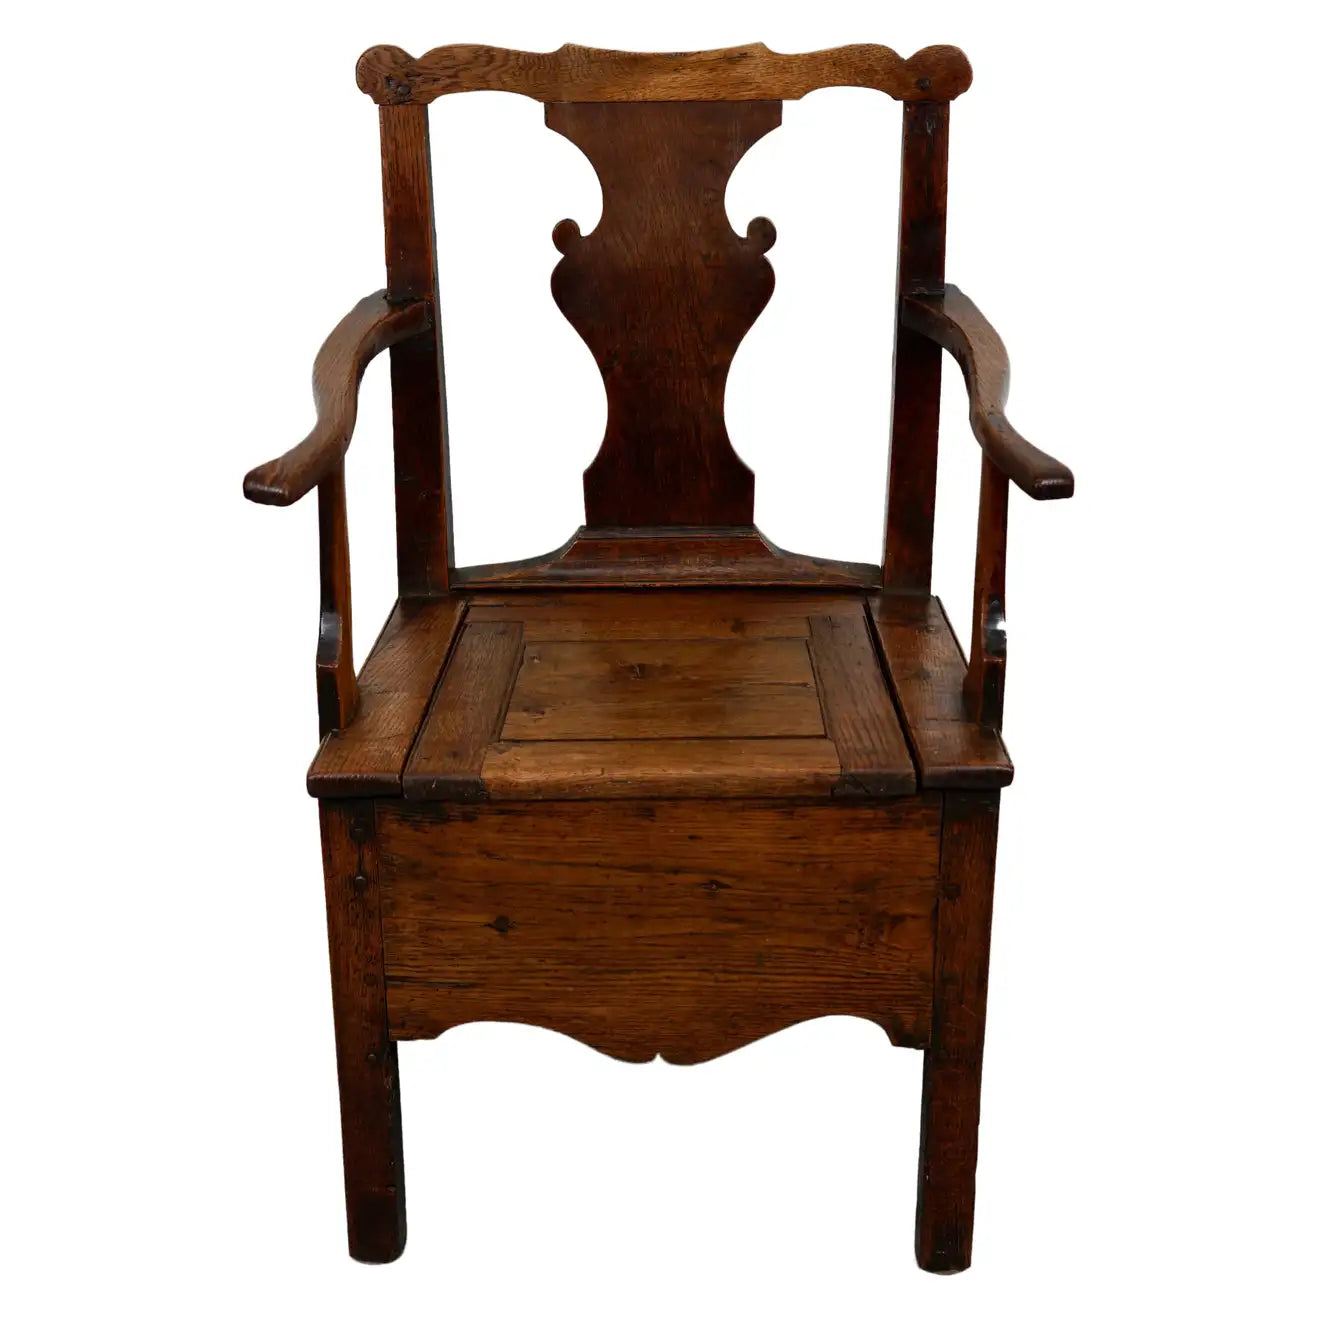 Antique English Oak Commode Chair 18th Century